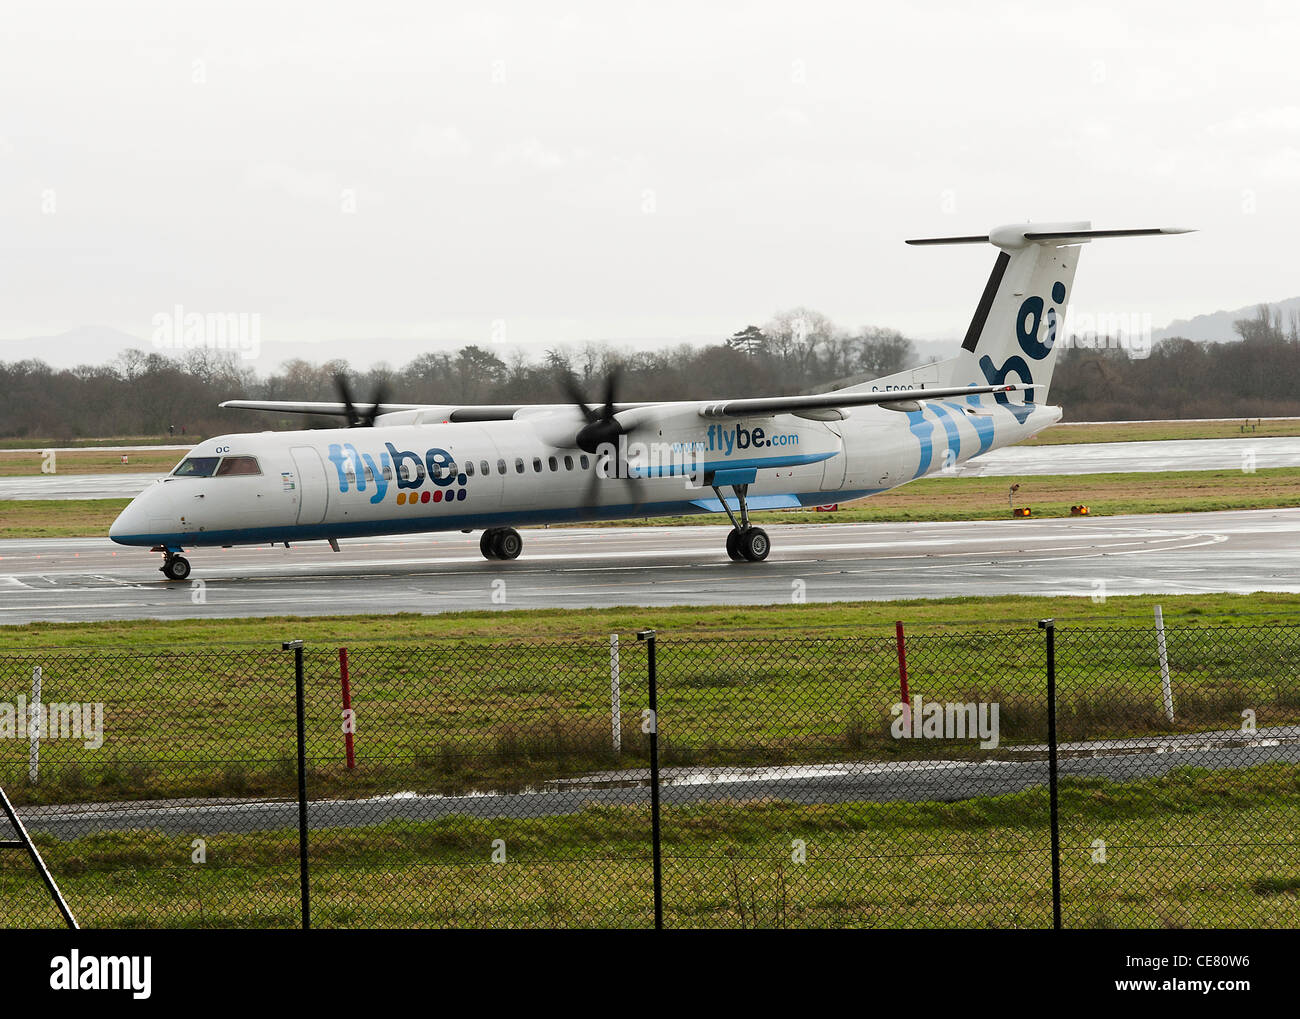 Flybe Airlines Bombardier DHC-8-402 Q400 Airliner G-ECOC Taxiing at Manchester International Airport England United Kingdom UK Stock Photo